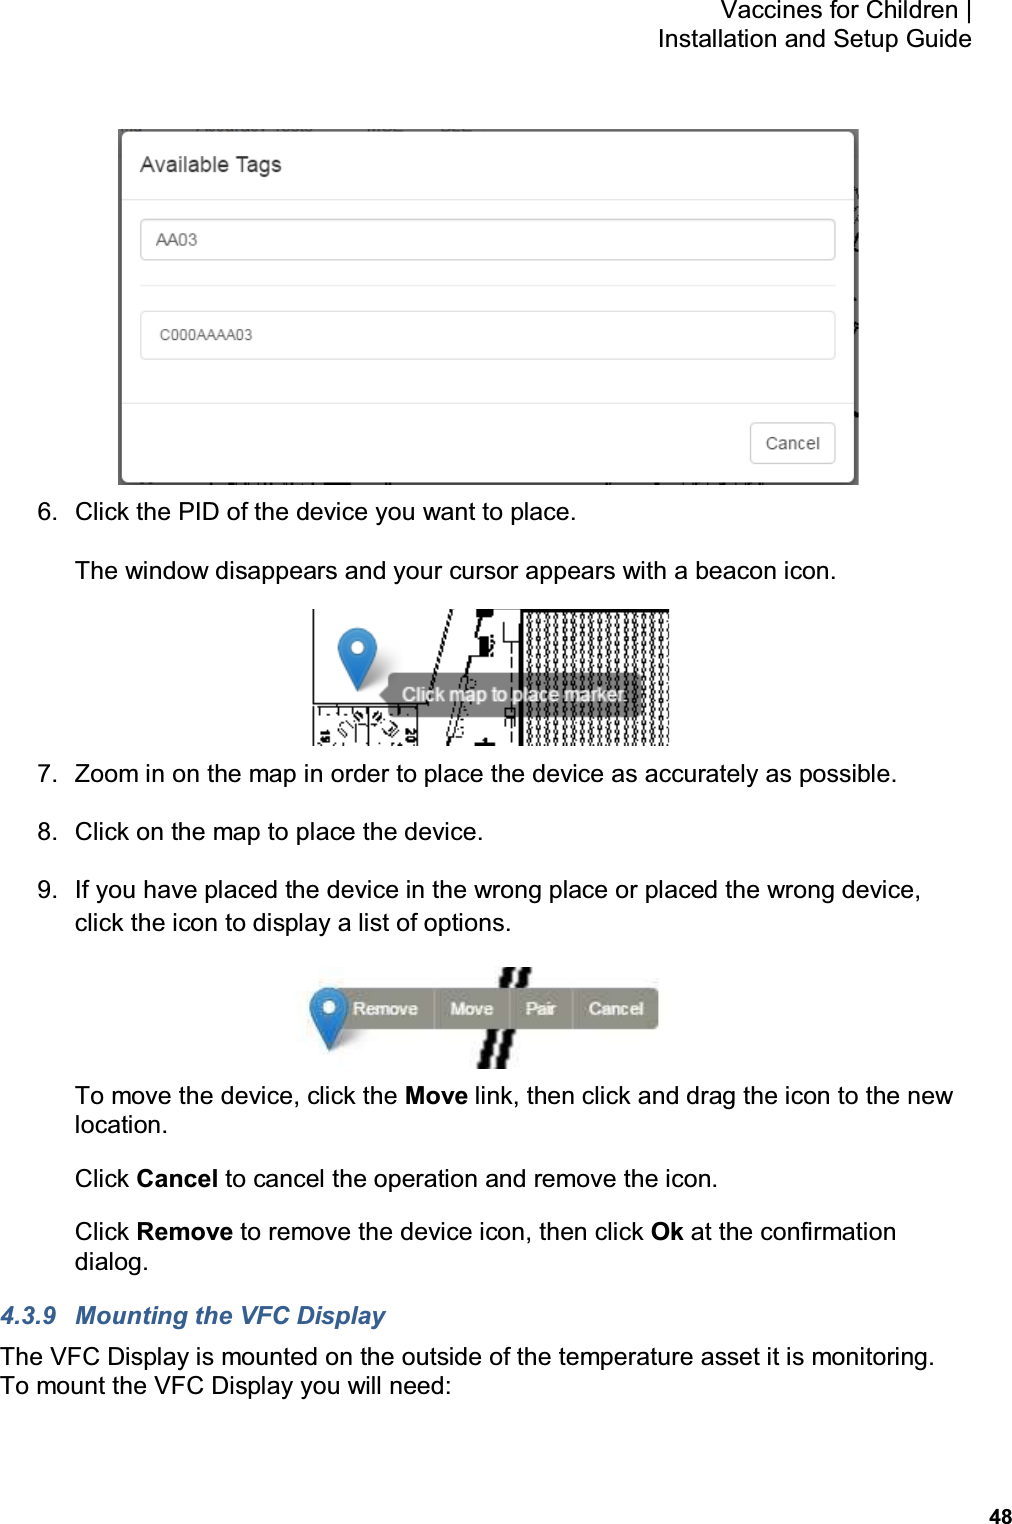           48 Vaccines for Children |  Installation and Setup Guide  6.  Click the PID of the device you want to place. The window disappears and your cursor appears with a beacon icon.  7.  Zoom in on the map in order to place the device as accurately as possible. 8.  Click on the map to place the device. 9.  If you have placed the device in the wrong place or placed the wrong device, click the icon to display a list of options.  To move the device, click the Move link, then click and drag the icon to the new location. Click Cancel to cancel the operation and remove the icon. Click Remove to remove the device icon, then click Ok at the confirmation dialog. 4.3.9  Mounting the VFC Display The VFC Display is mounted on the outside of the temperature asset it is monitoring.  To mount the VFC Display you will need: 